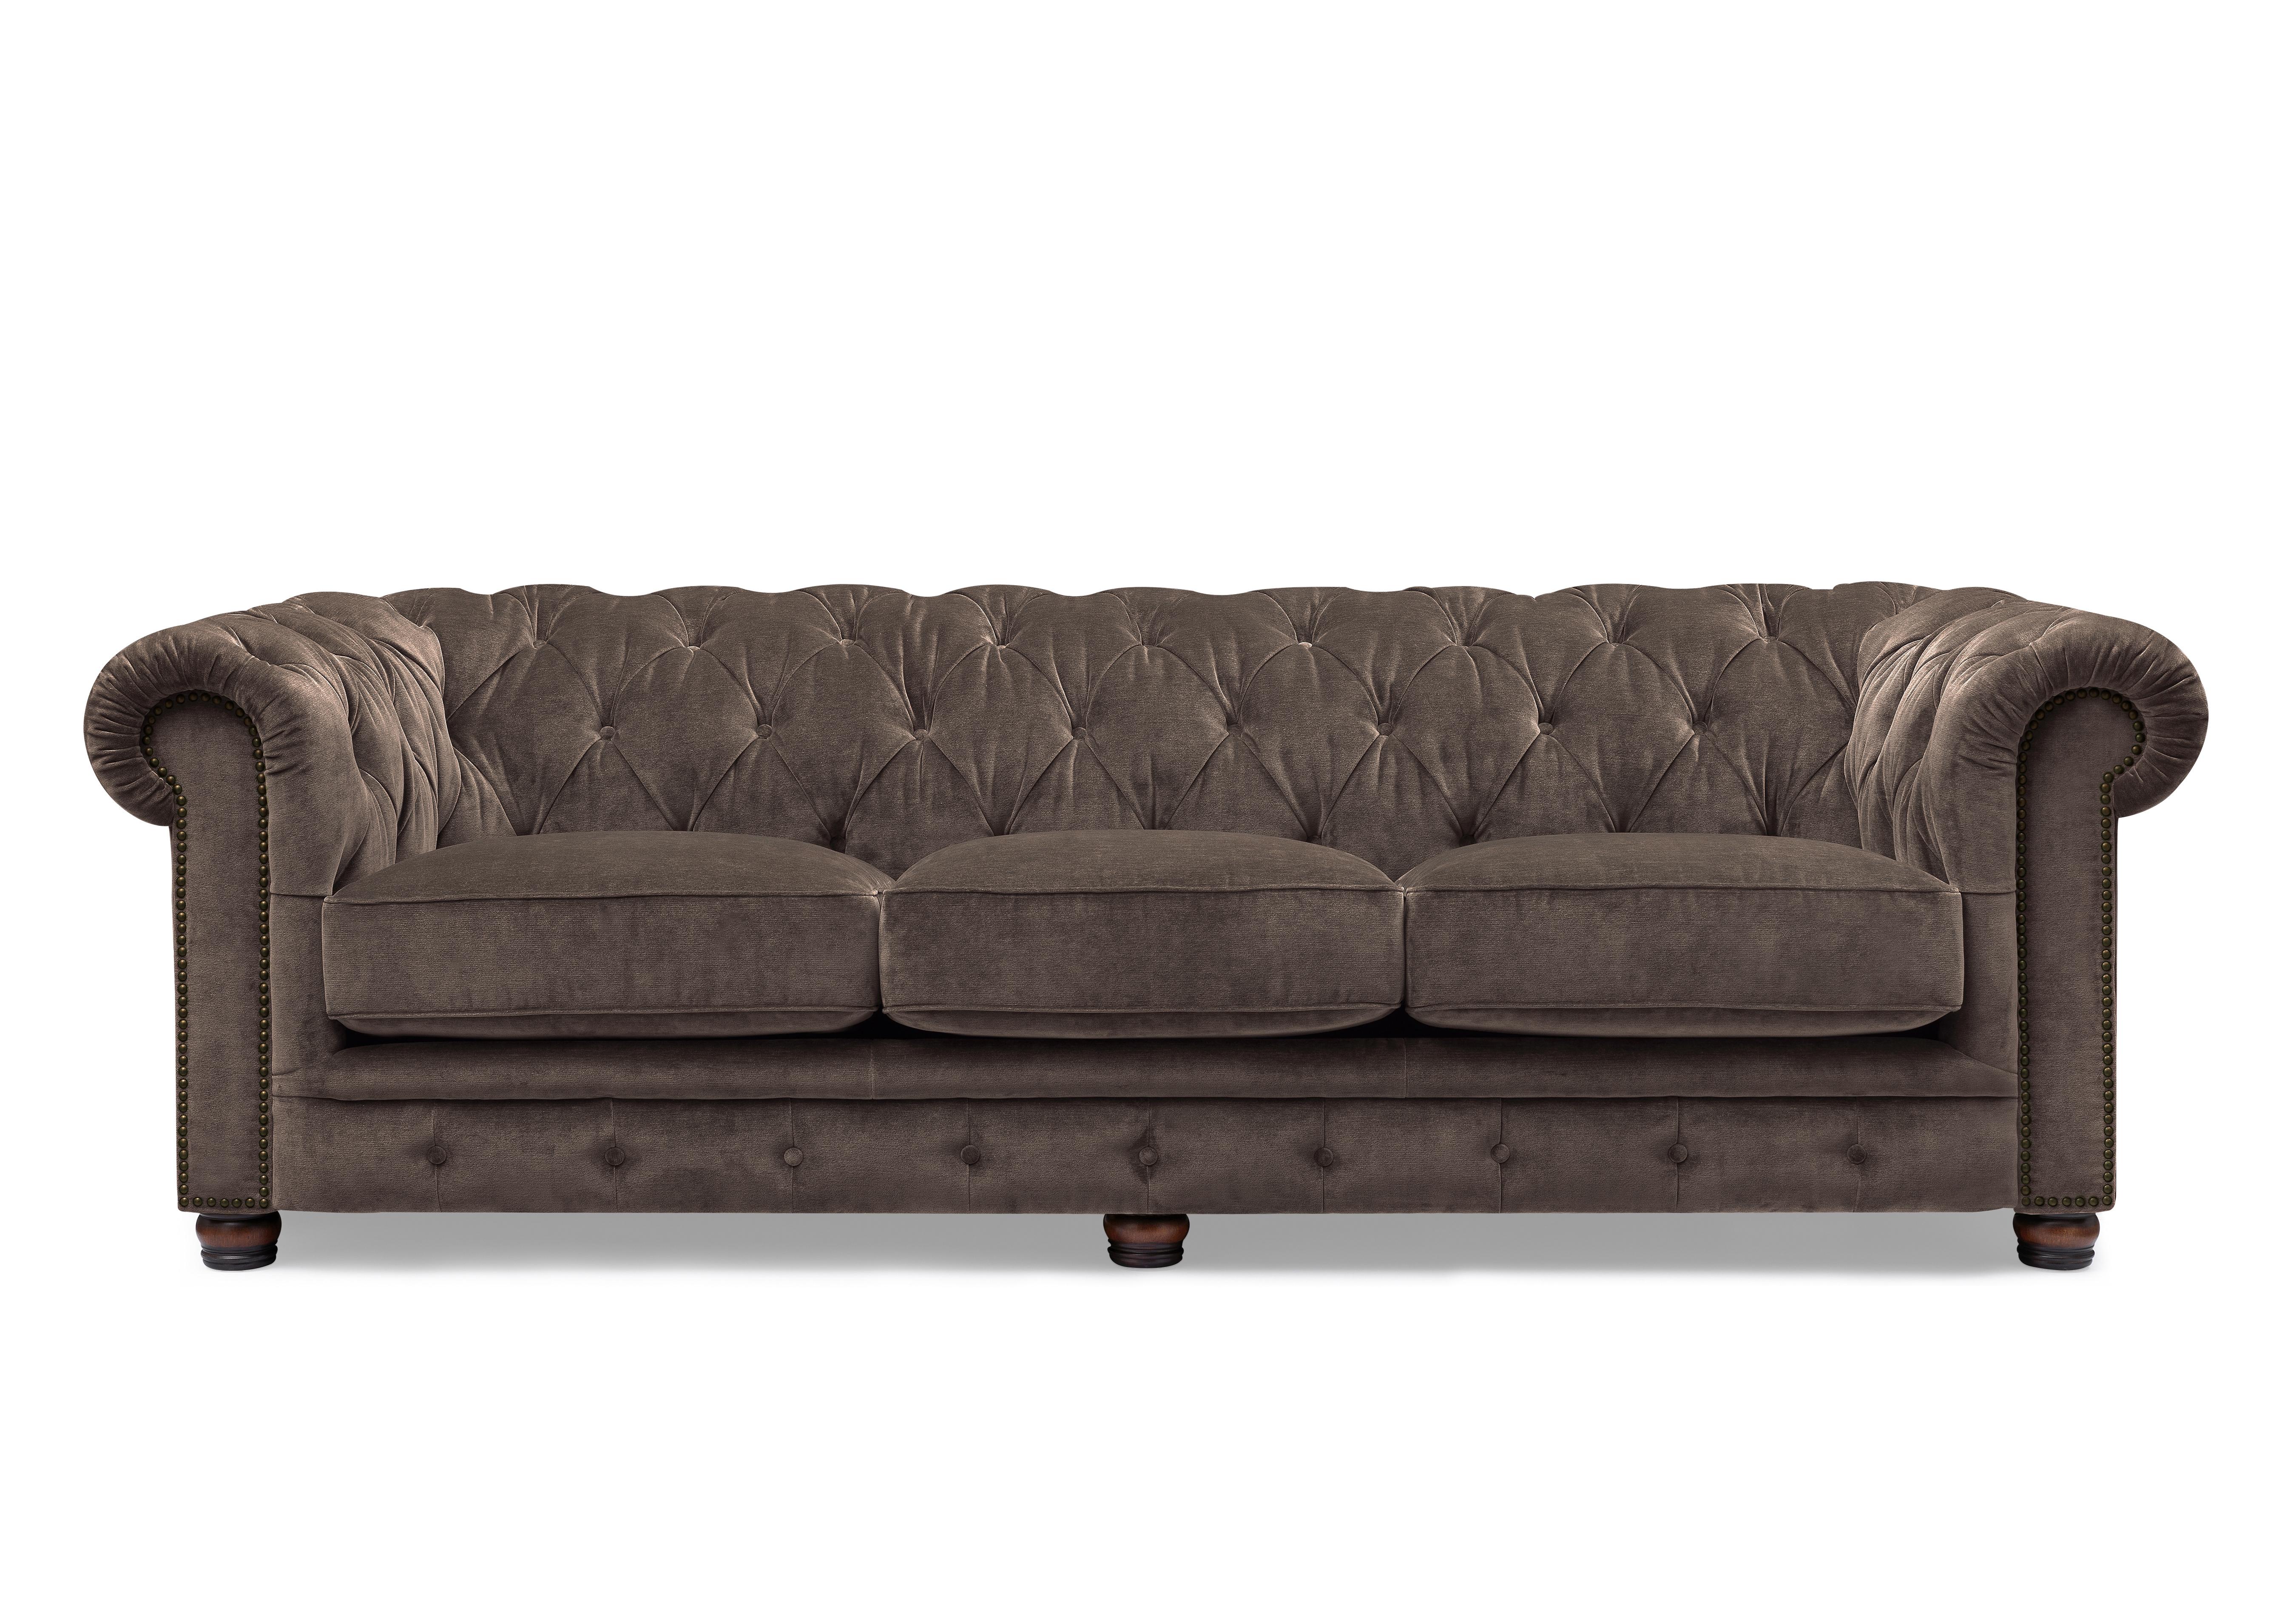 Shackleton 4 Seater Fabric Chesterfield Sofa in X3y1-W020 Brindle on Furniture Village